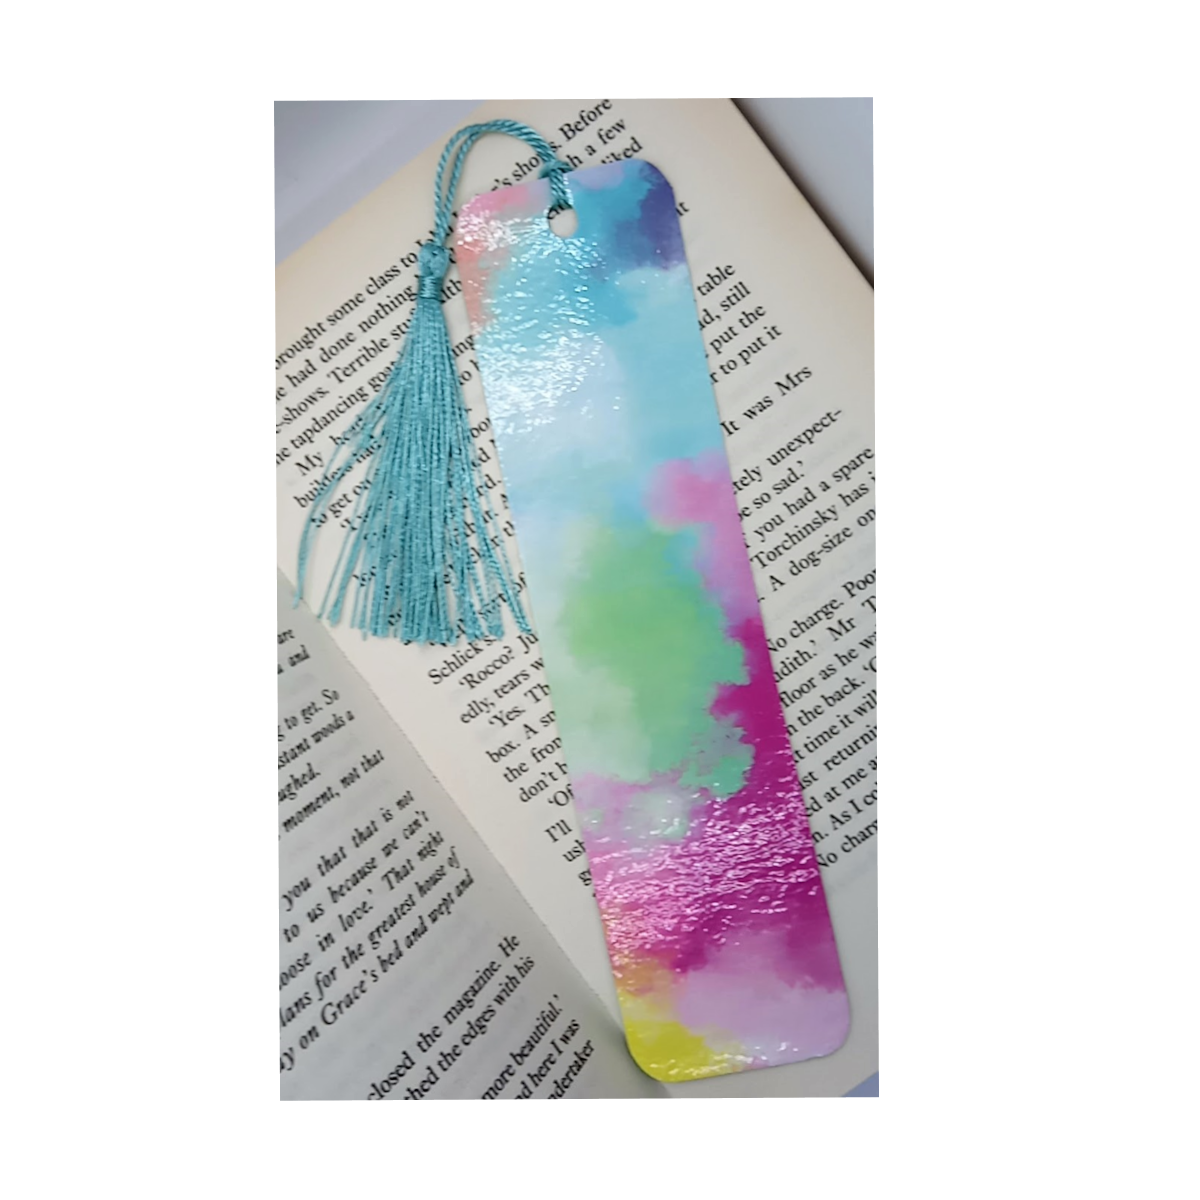 PU (imitation) leather bookmark - Just one more page